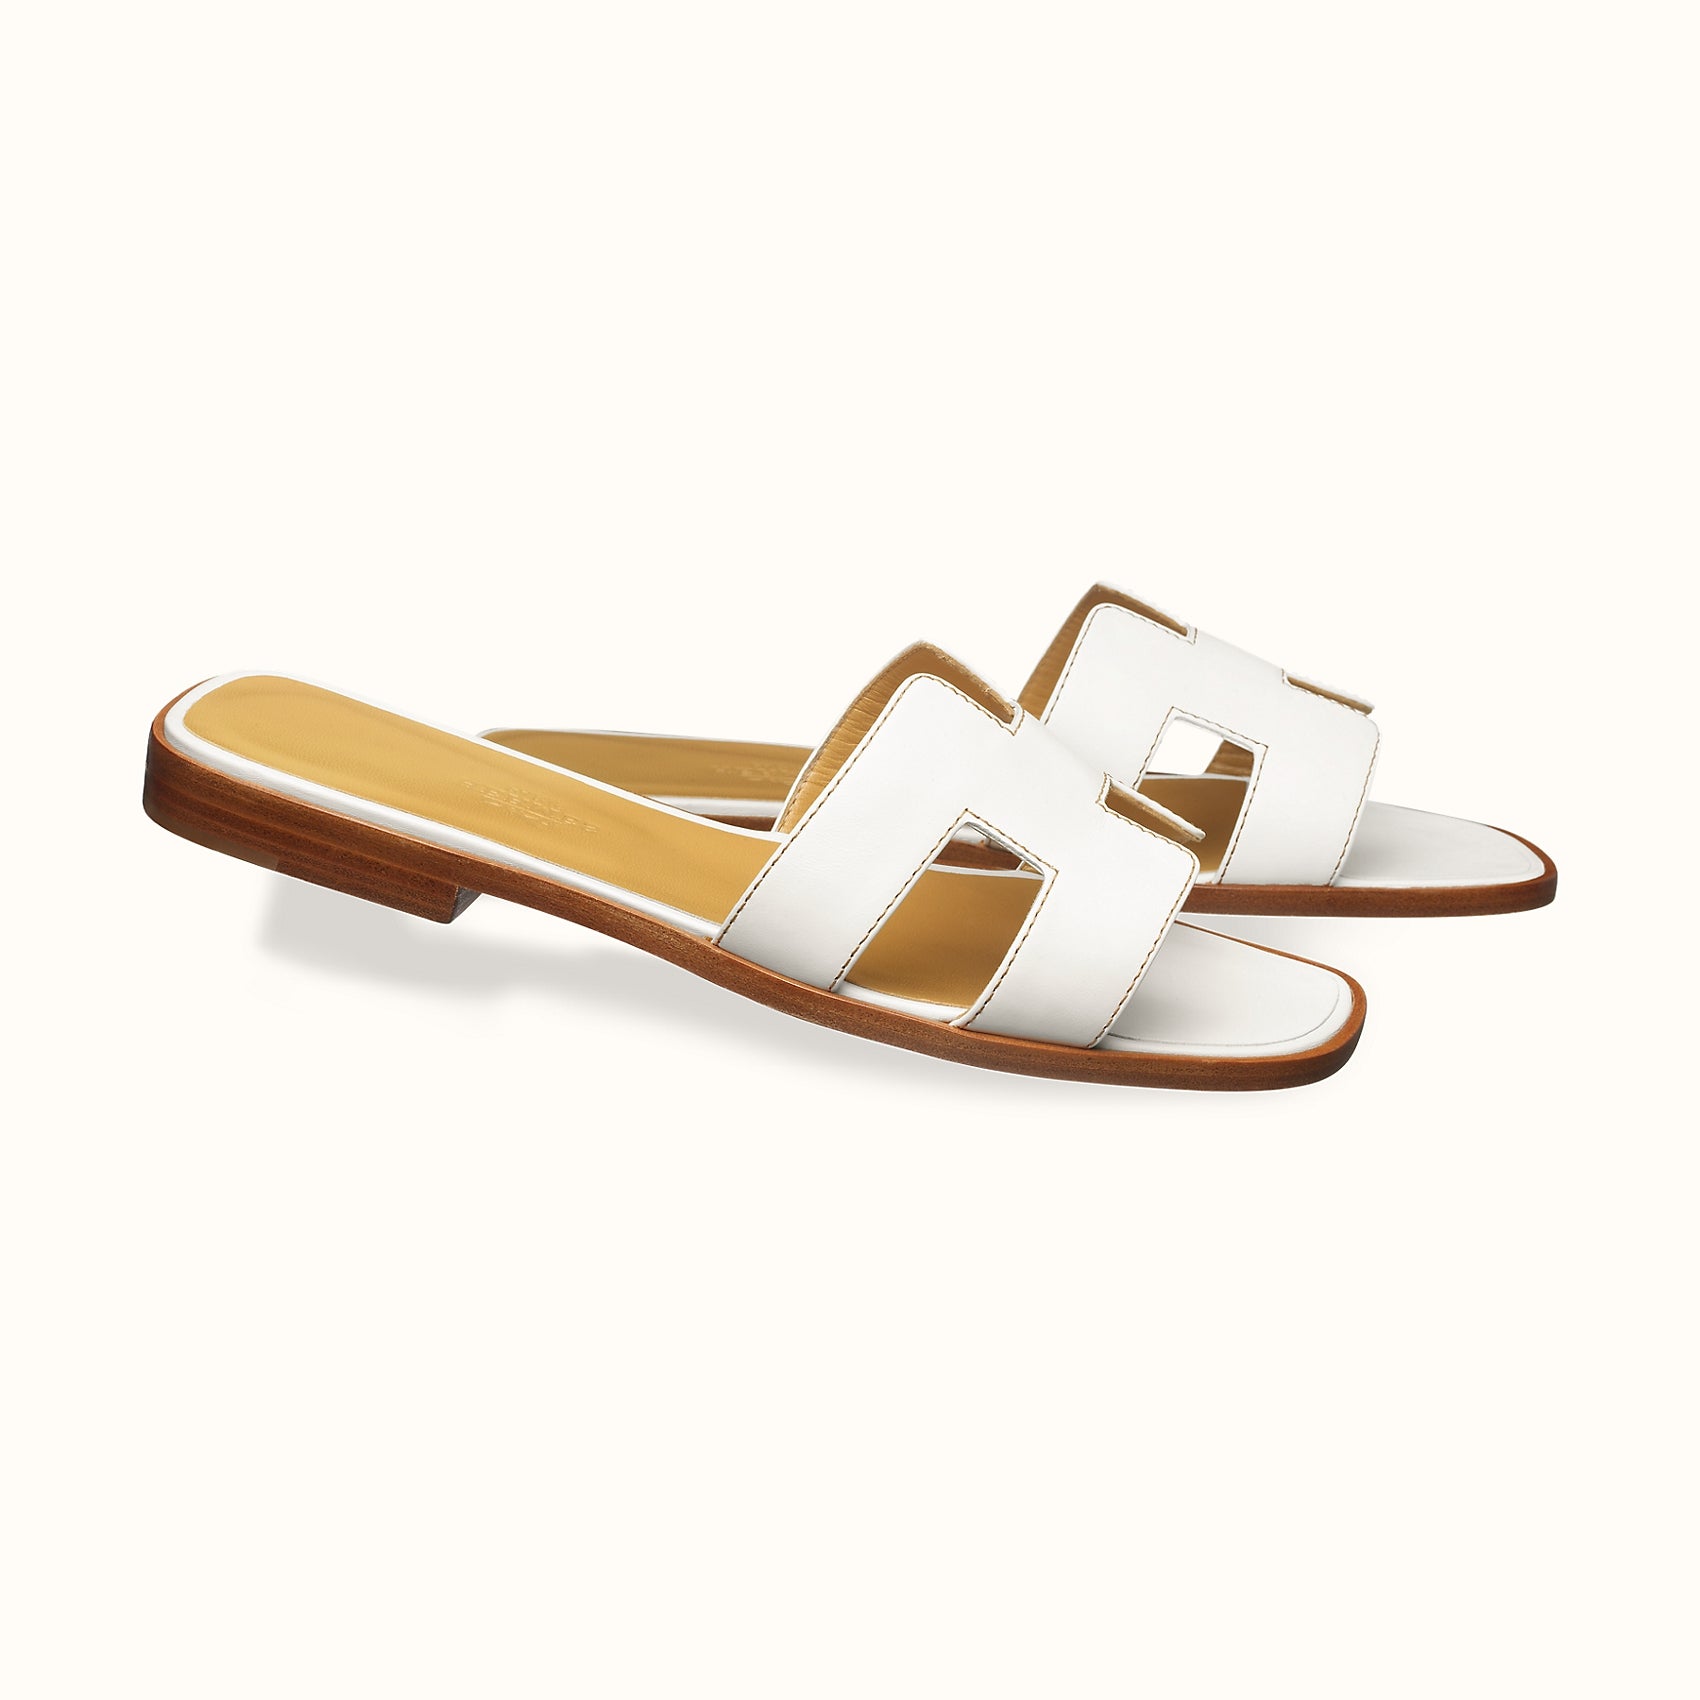 Everything You Need To Know About Hermes Sandals (Oran, Oasis and